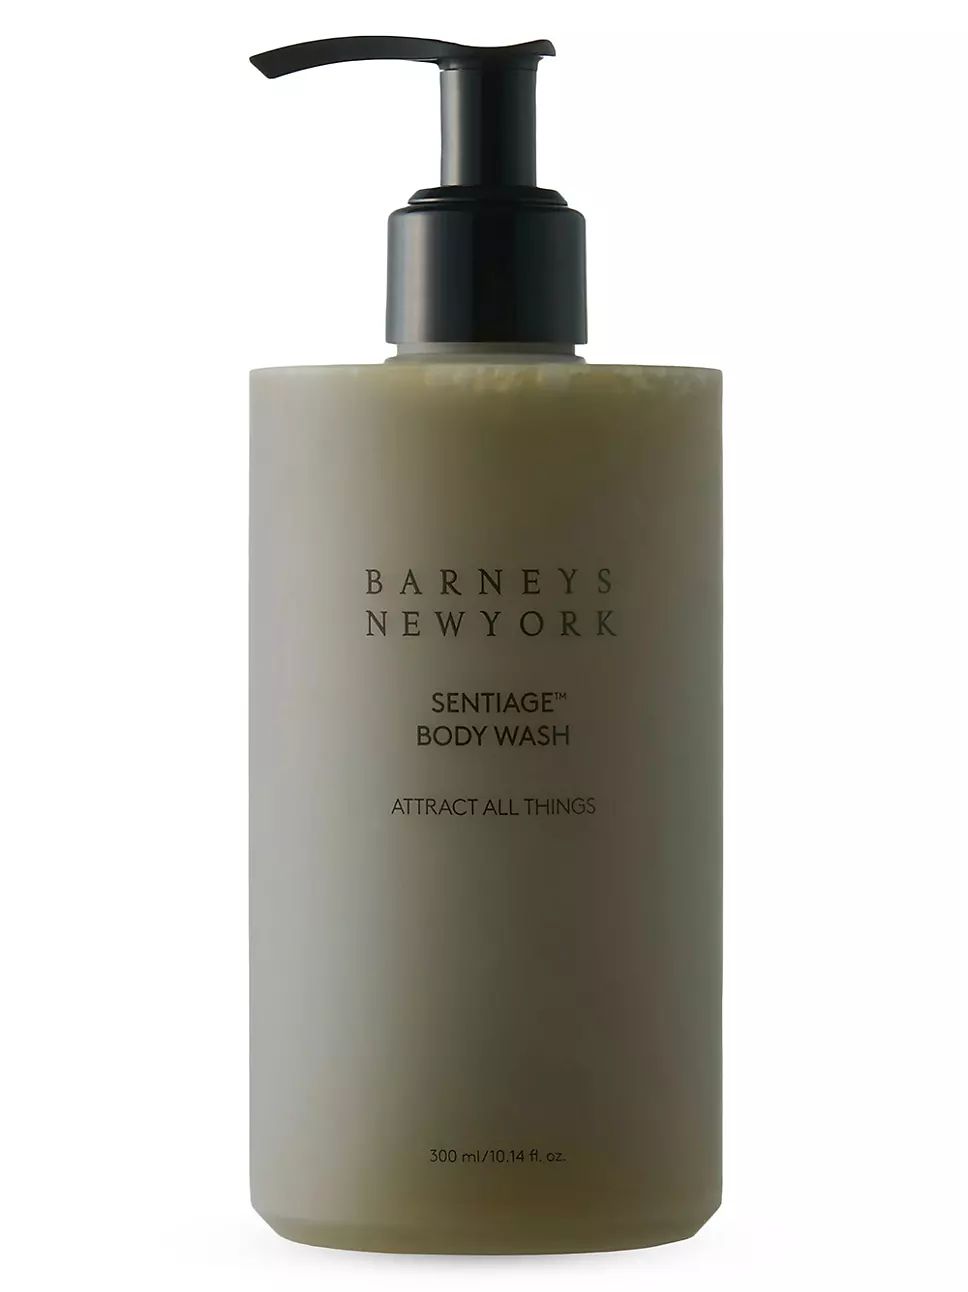 Barneys New York Beauty Sentiage Body Wash Attract All Things | Saks Fifth Avenue